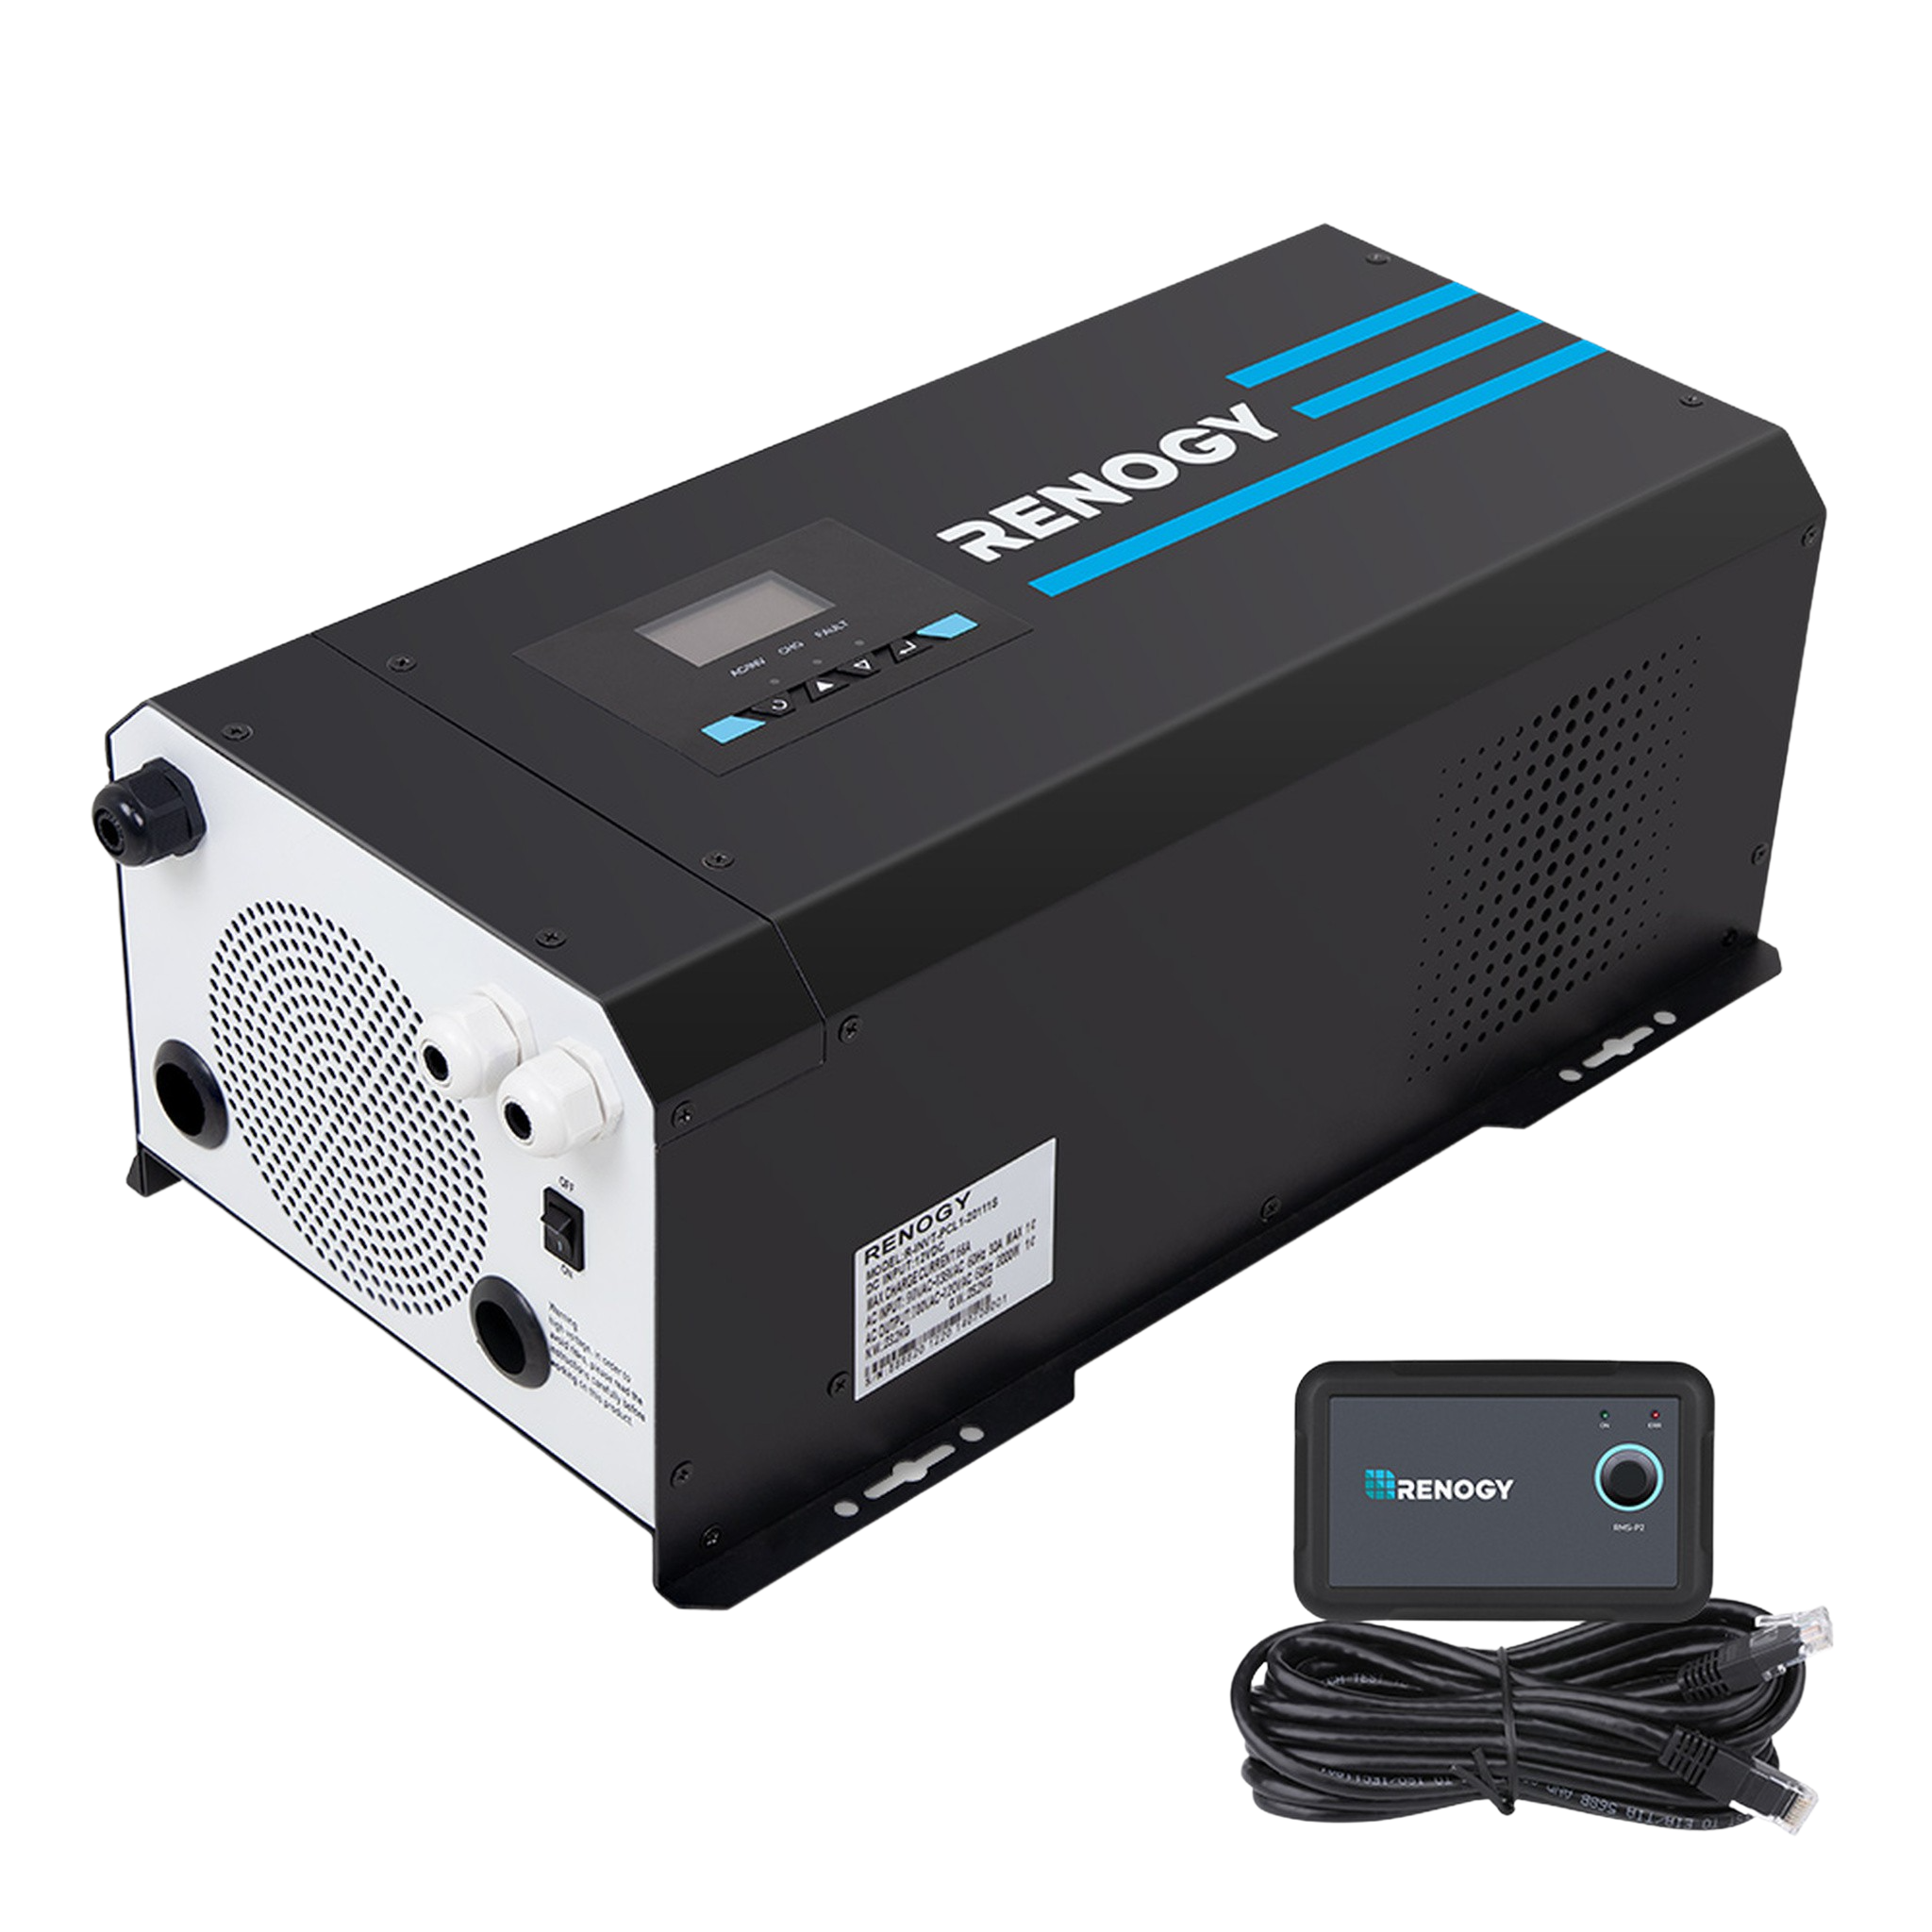 Renogy, Renogy R-INVT-PCL1-20111S-US 2000W 12V Pure Sine Wave Inverter Charger w/ LCD Display New